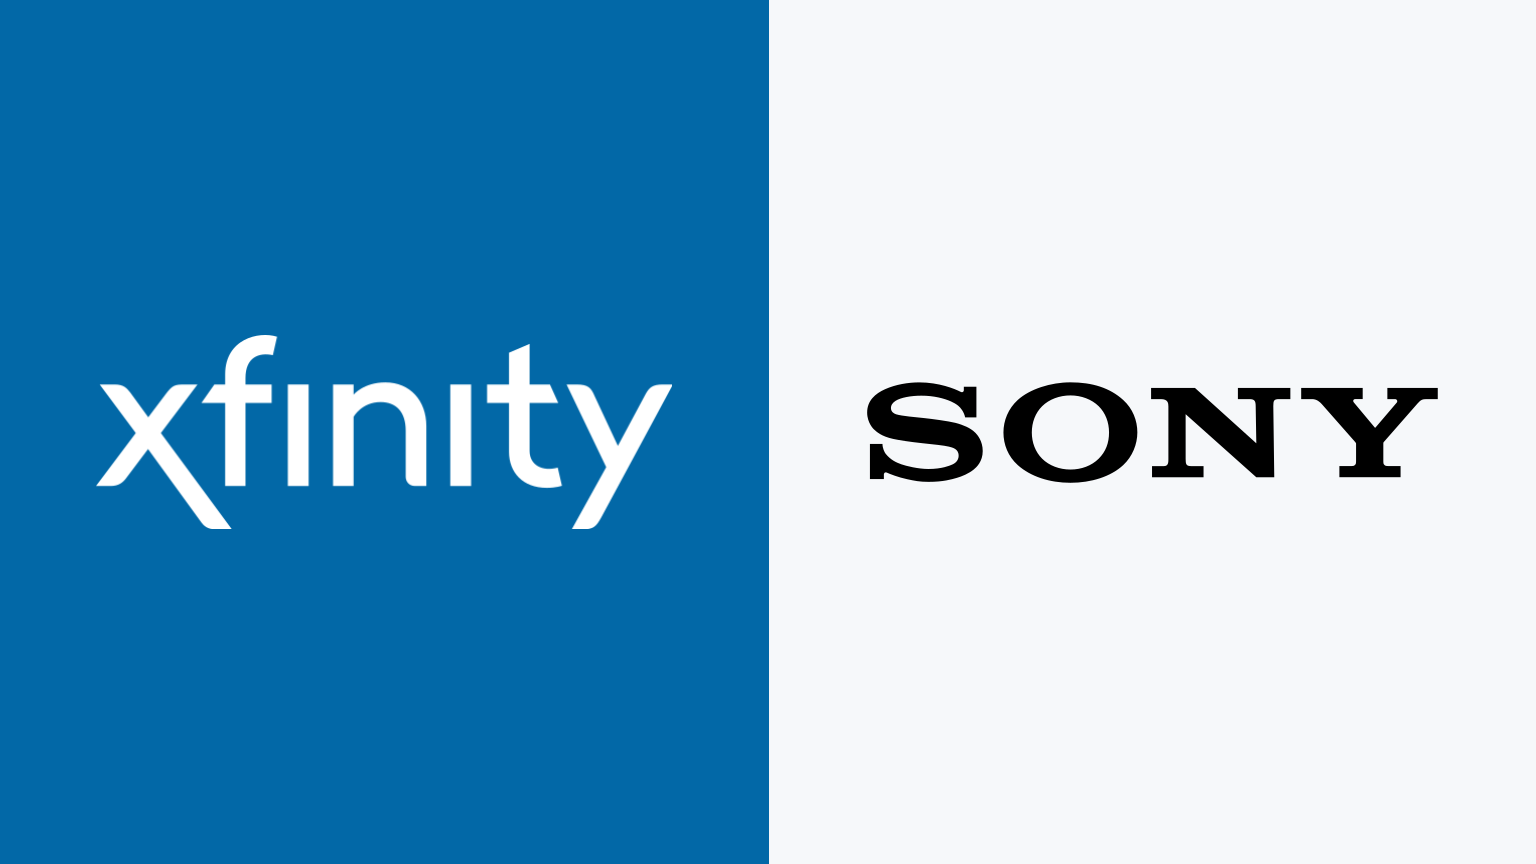 How To Watch Xfinity Instant Tv On Sony Smart Tv – The Streamable